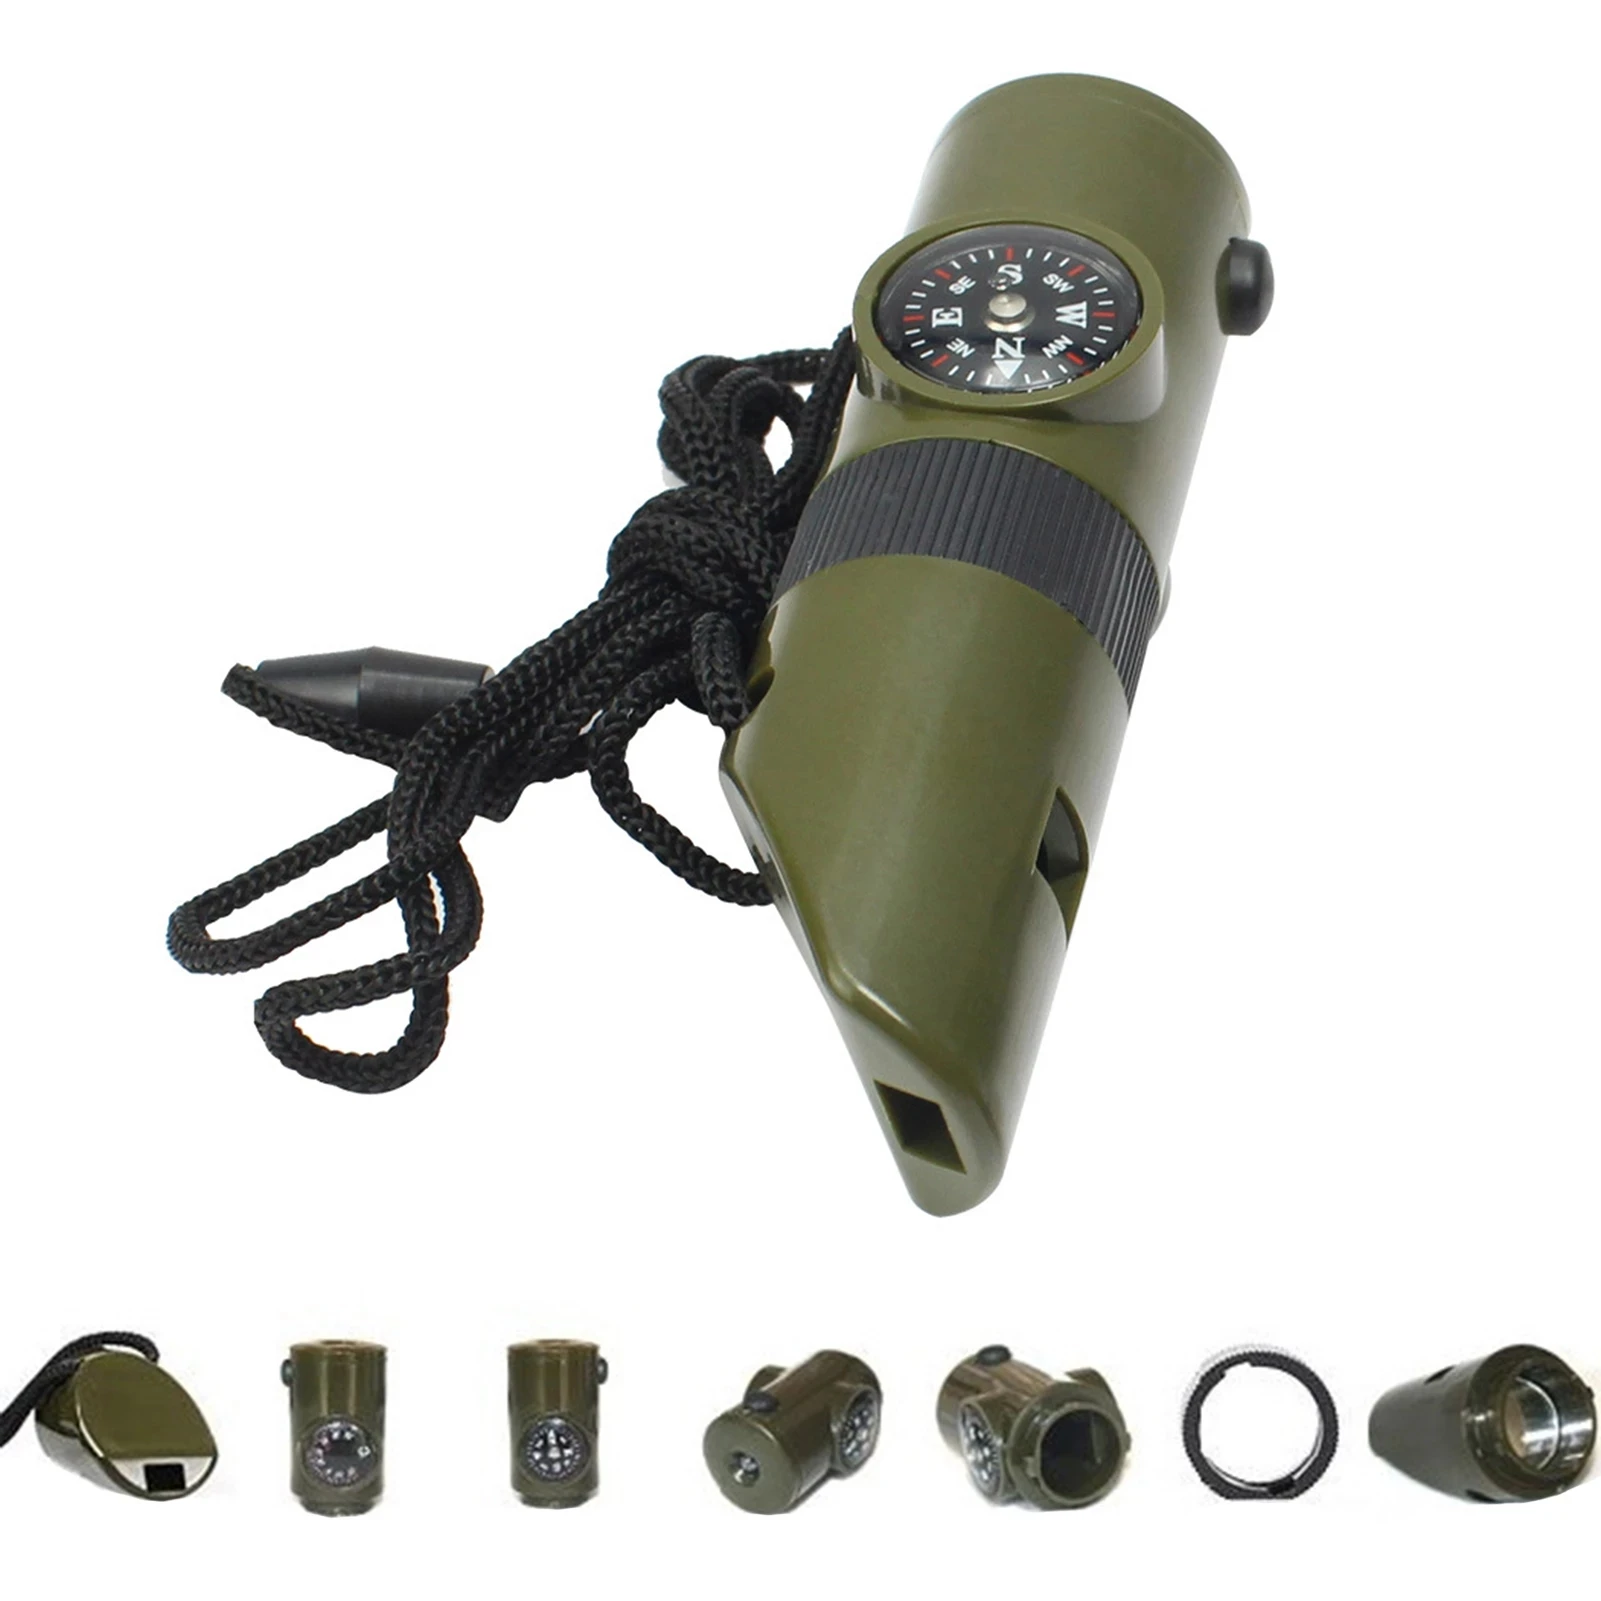 

7 In 1 Whistle Survival Bushcraft Trekking Whistle Compass Mirror Torch Magnifier Led Light Thermometer Storage Compass Tools